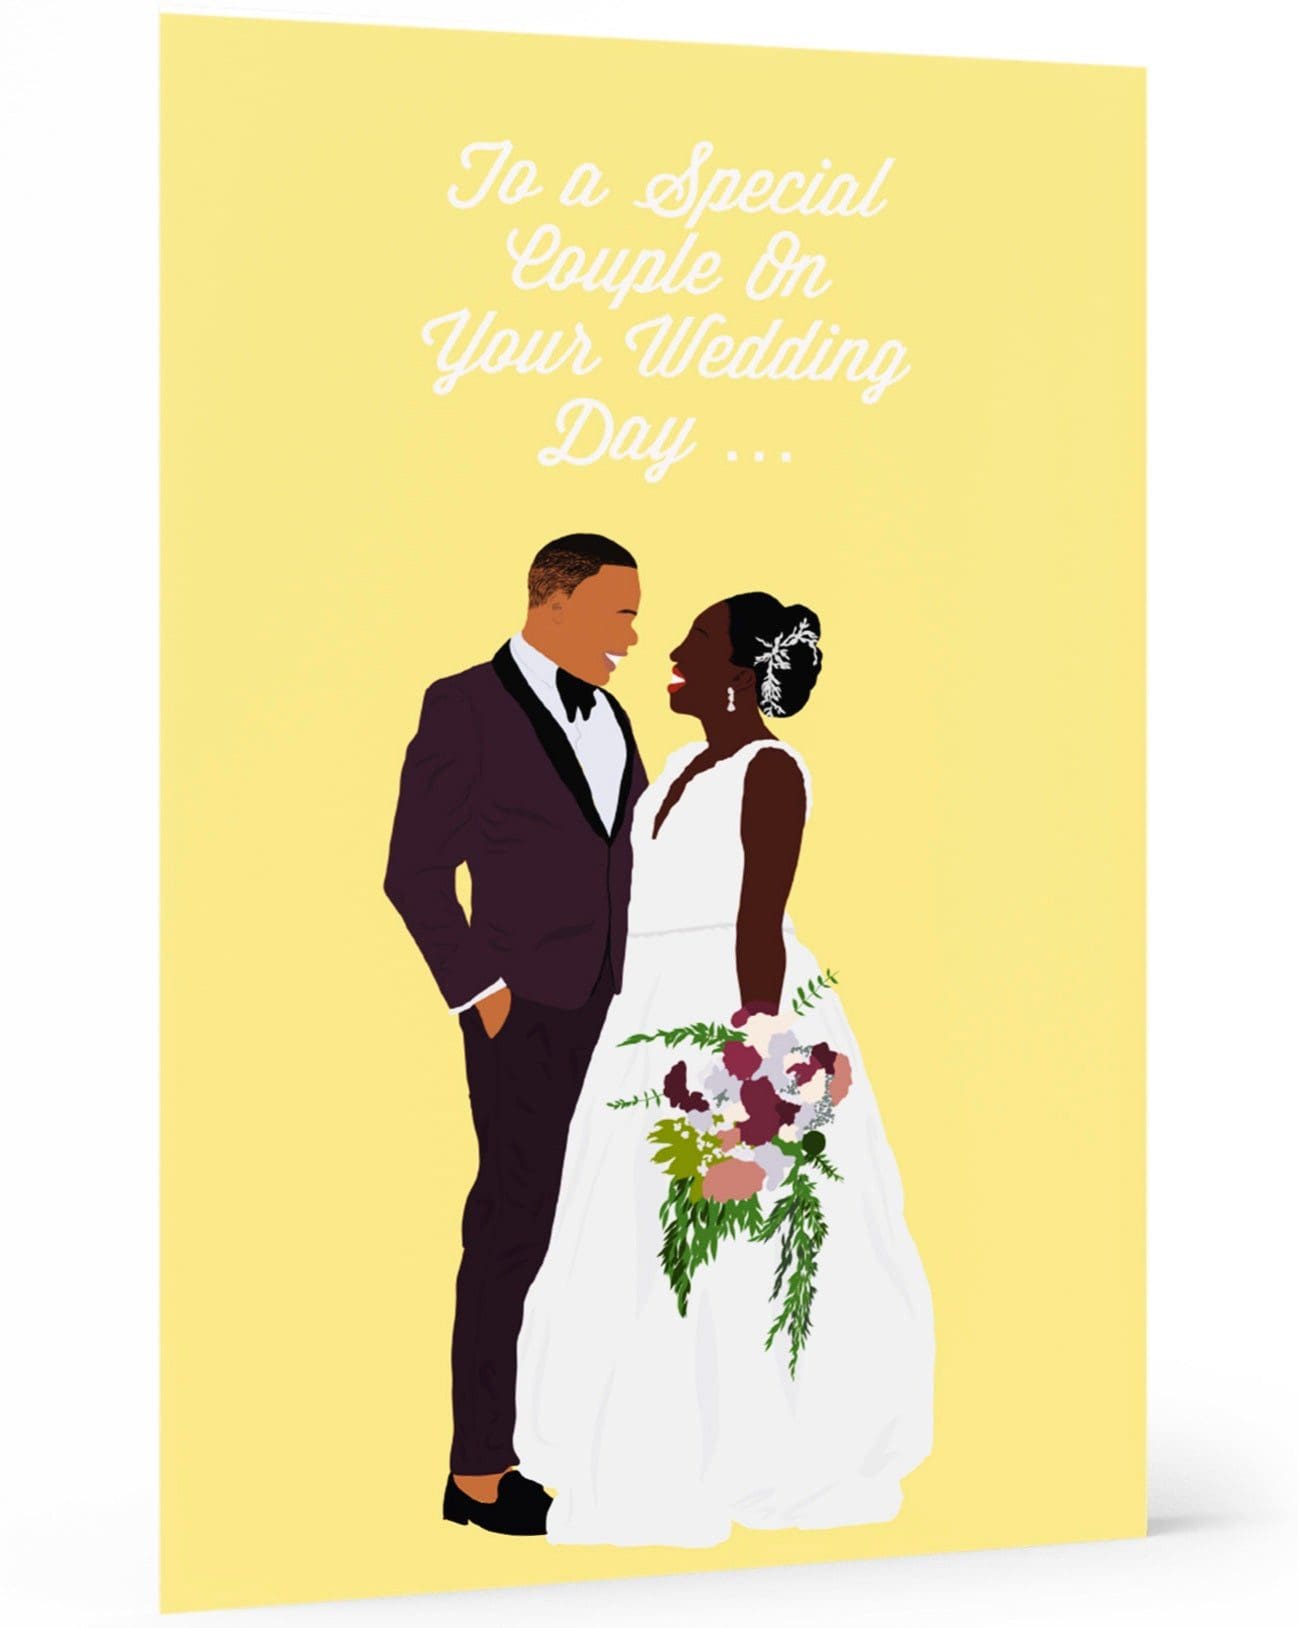 Special Couple Card, wakuda, african print fans, black-owned brands, black pound day